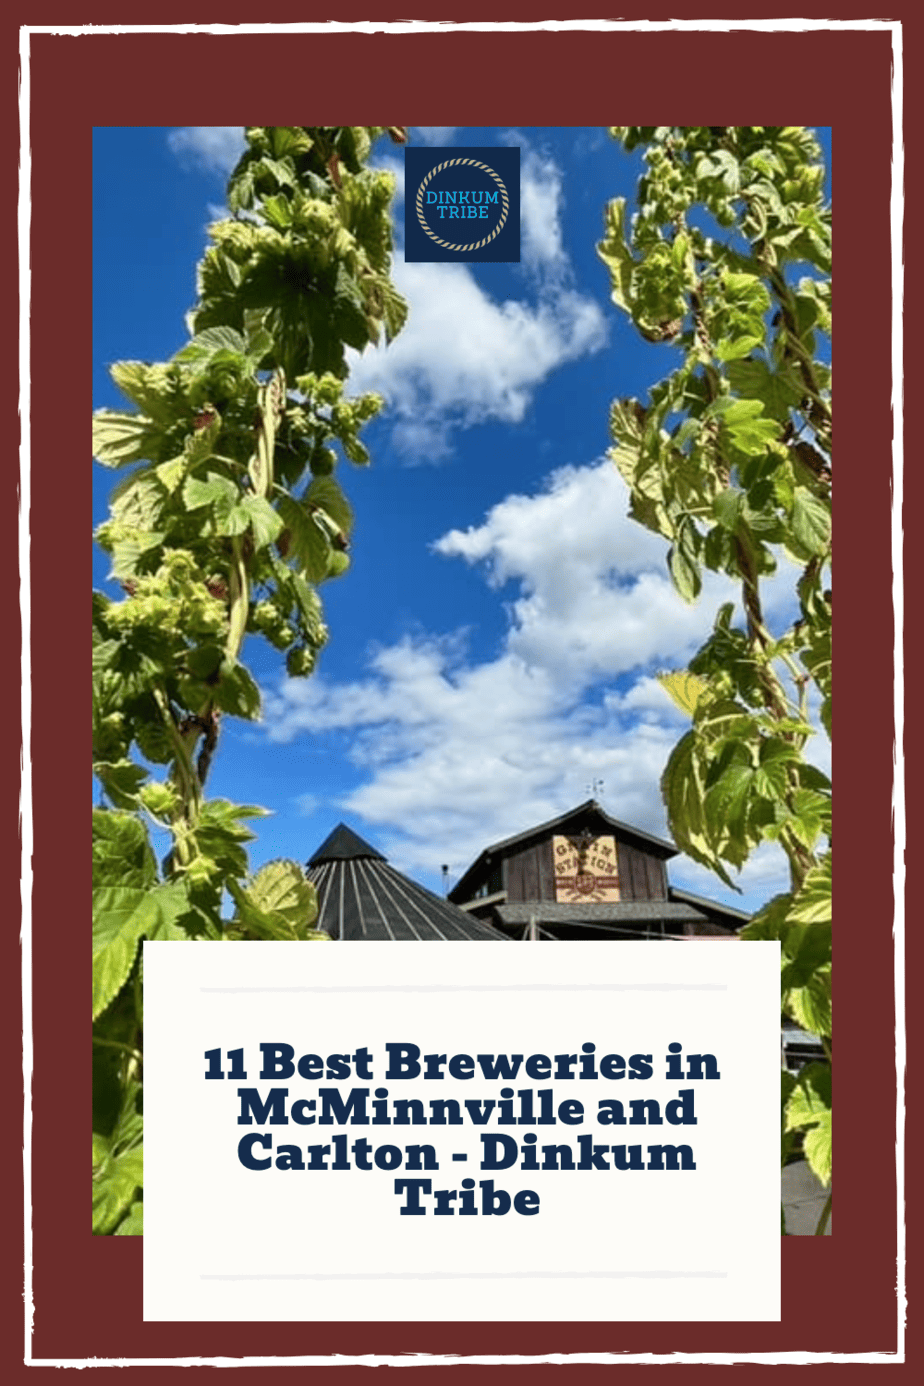 Pinnable image for best breweries in McMinnville and Carlton